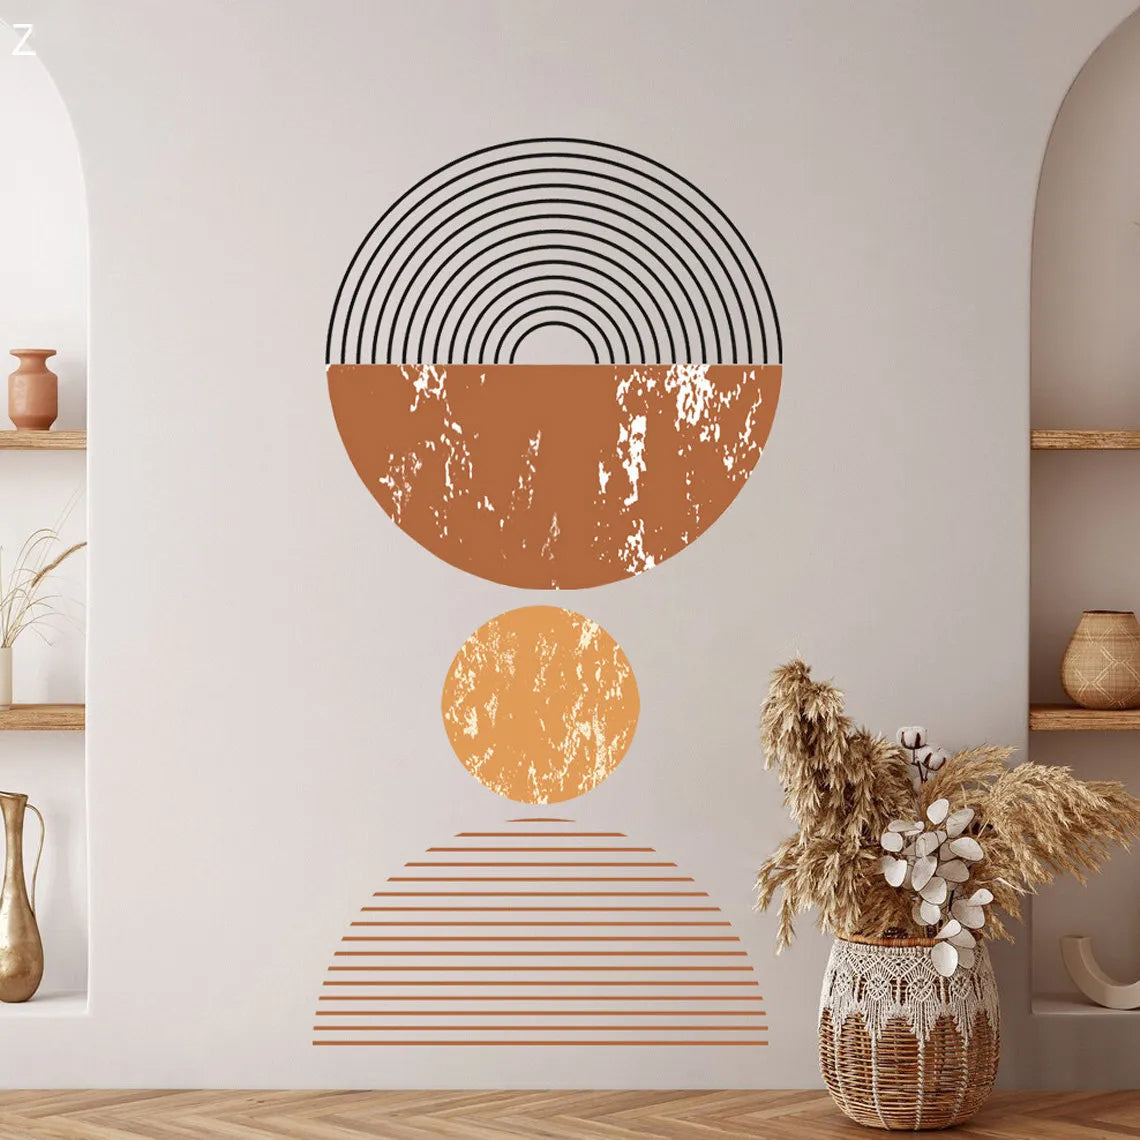 Geometric Circles Sun & Moon Wall Sticker For Kitchen Living Room Removable Self Adhesive Vinyl Wall Decal For Creative DIY Home Decor